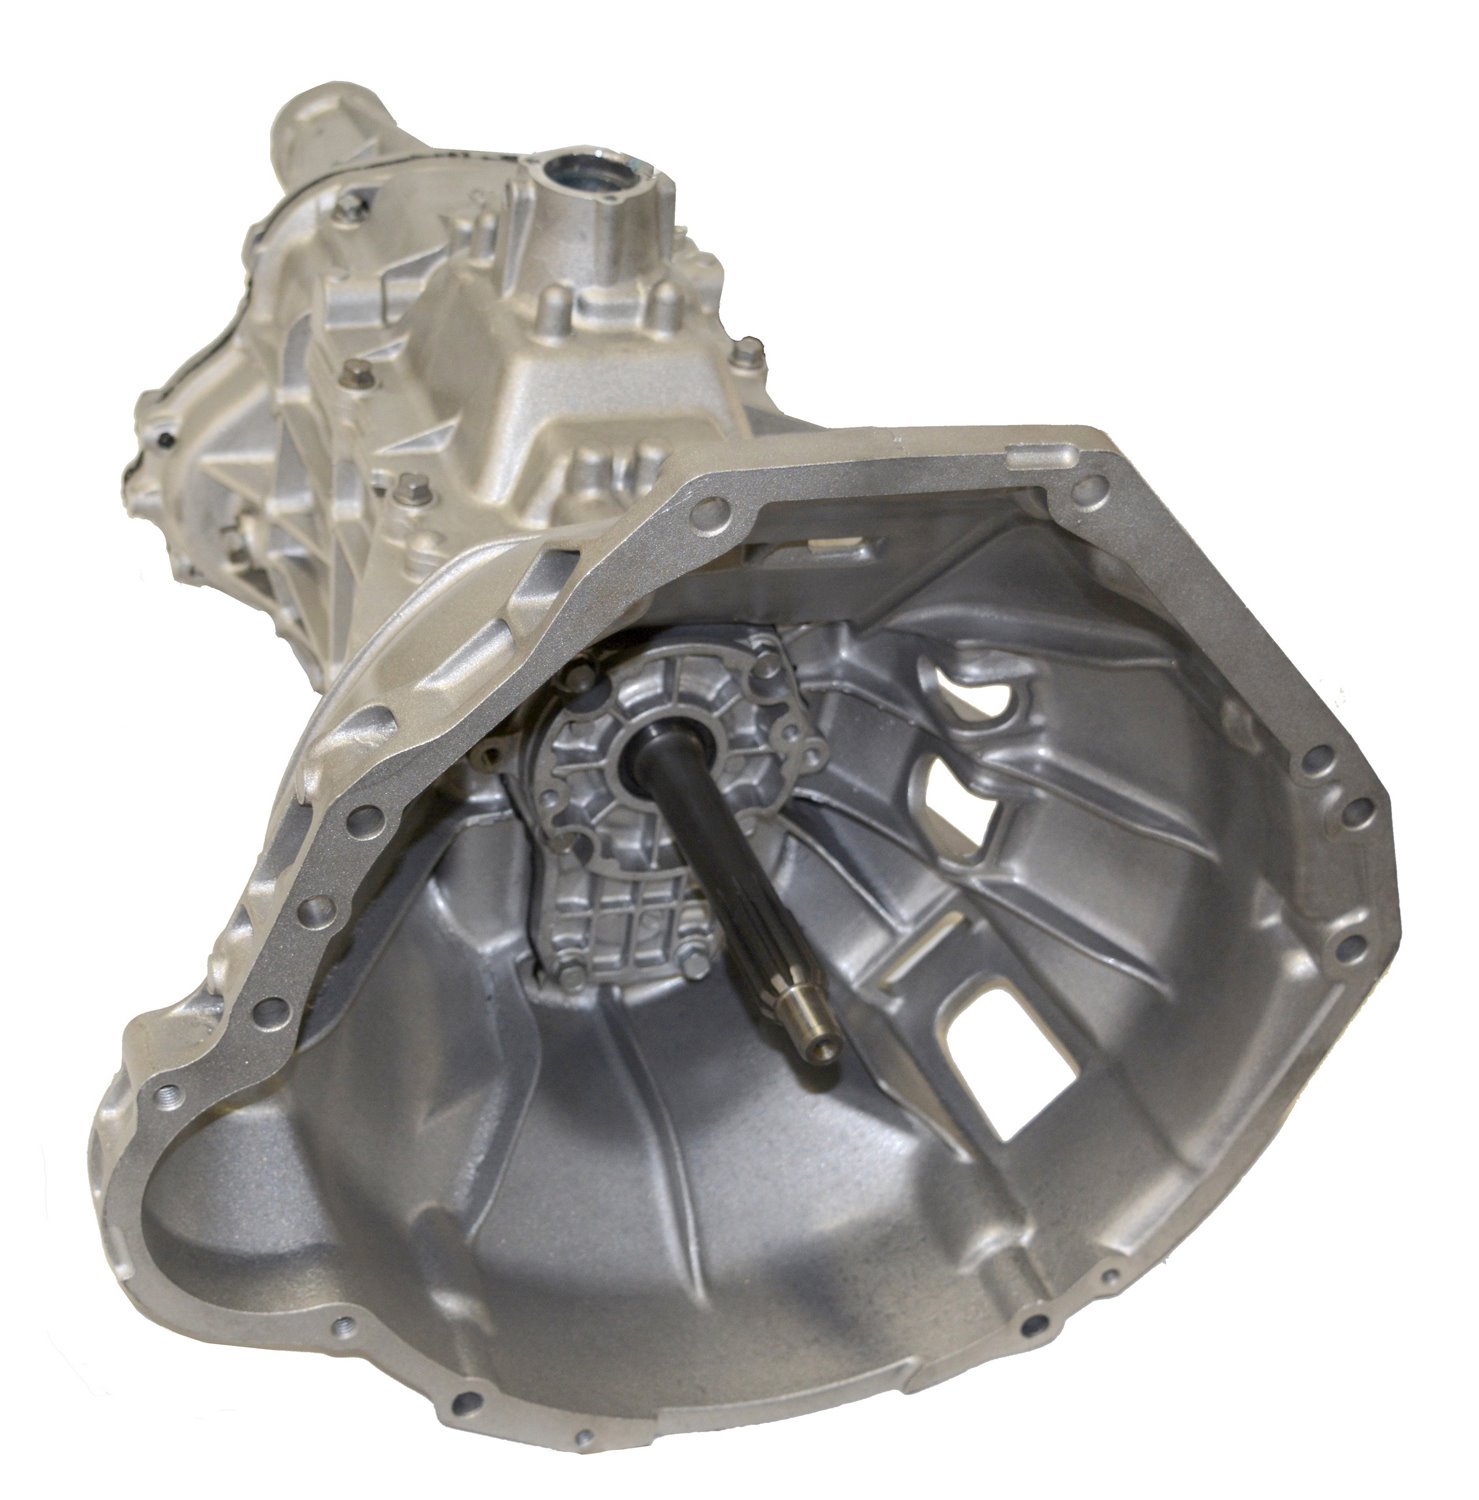 Remanufactured Manual Transmission for Ford 99-08 F150 & F250, 5 Speed